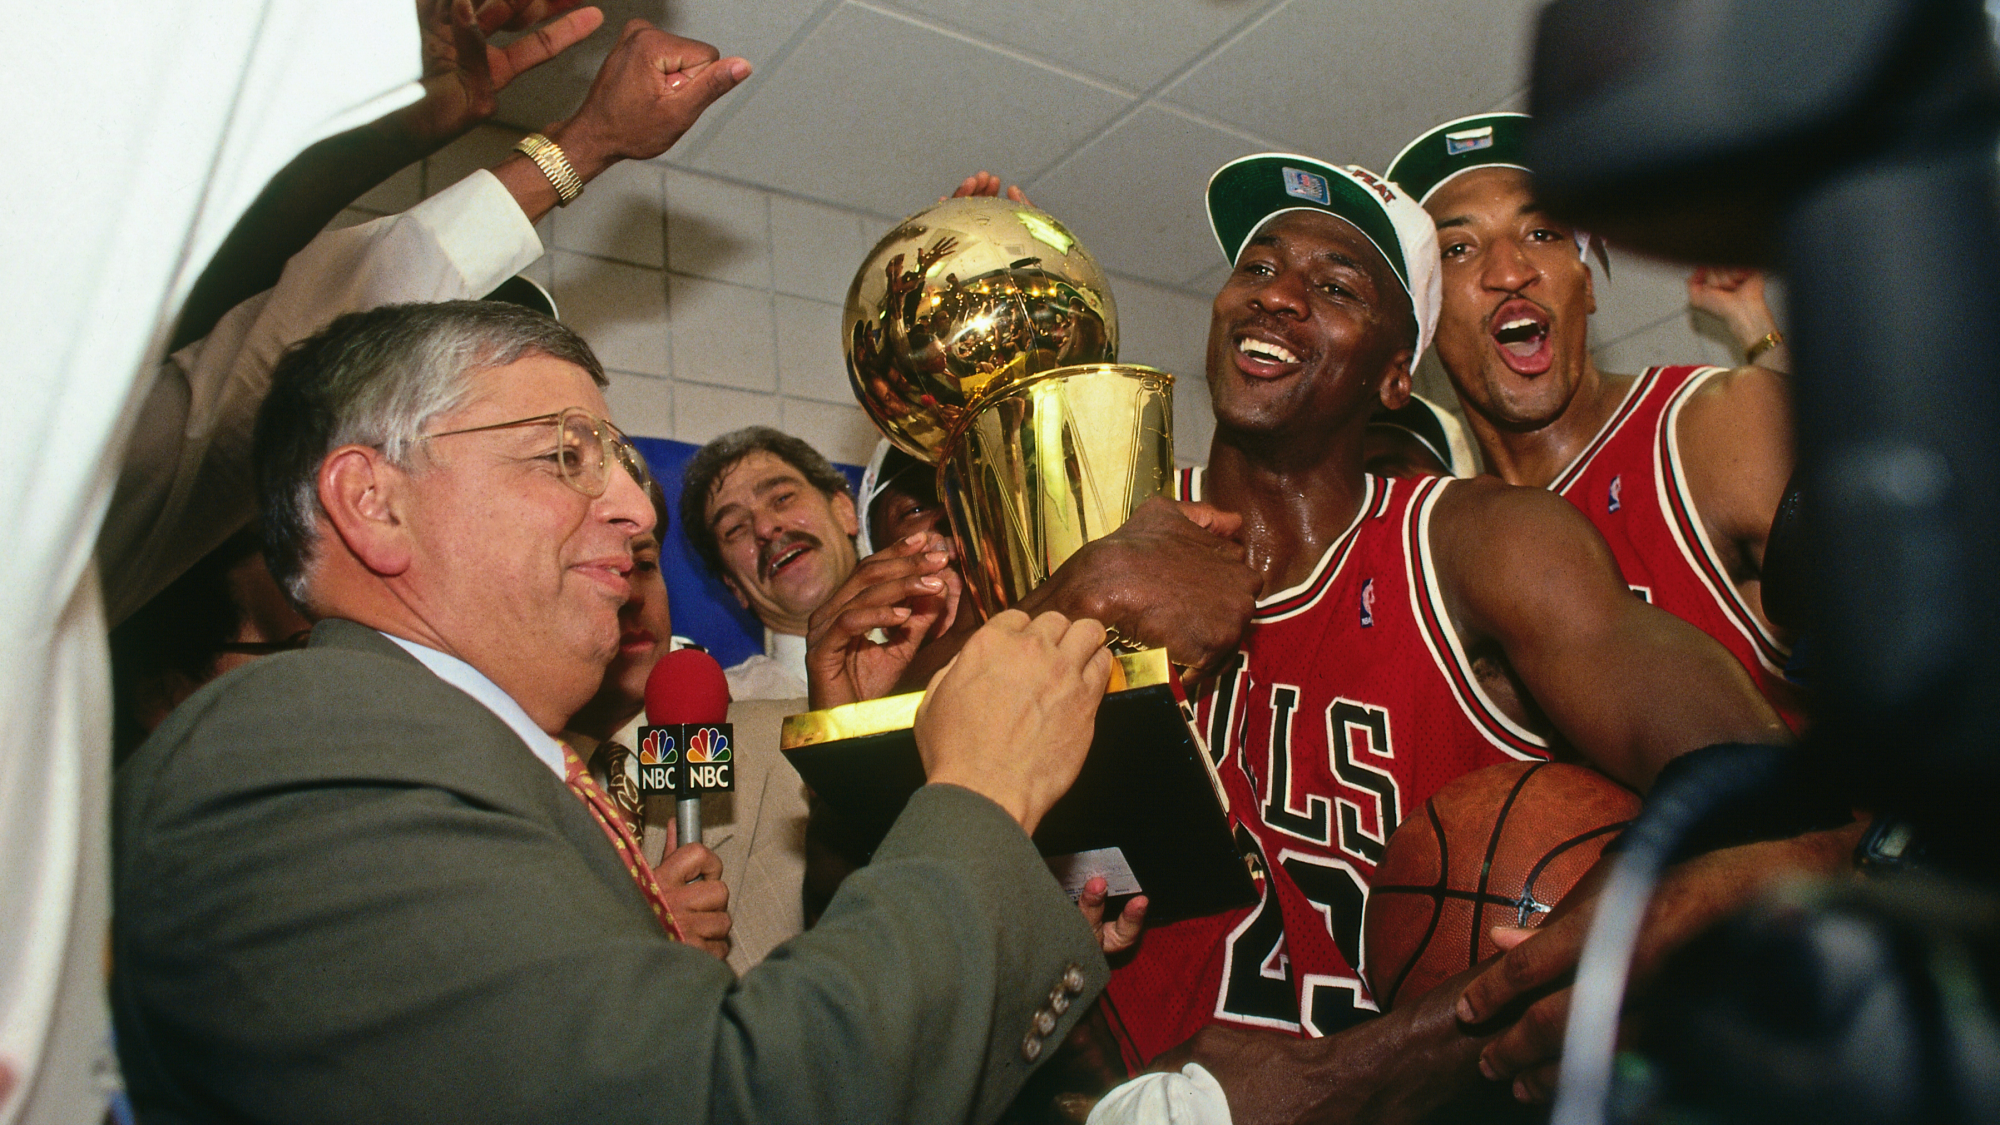 Michael Jordan and the Chicago Bulls in the dressing room celebrating victory.